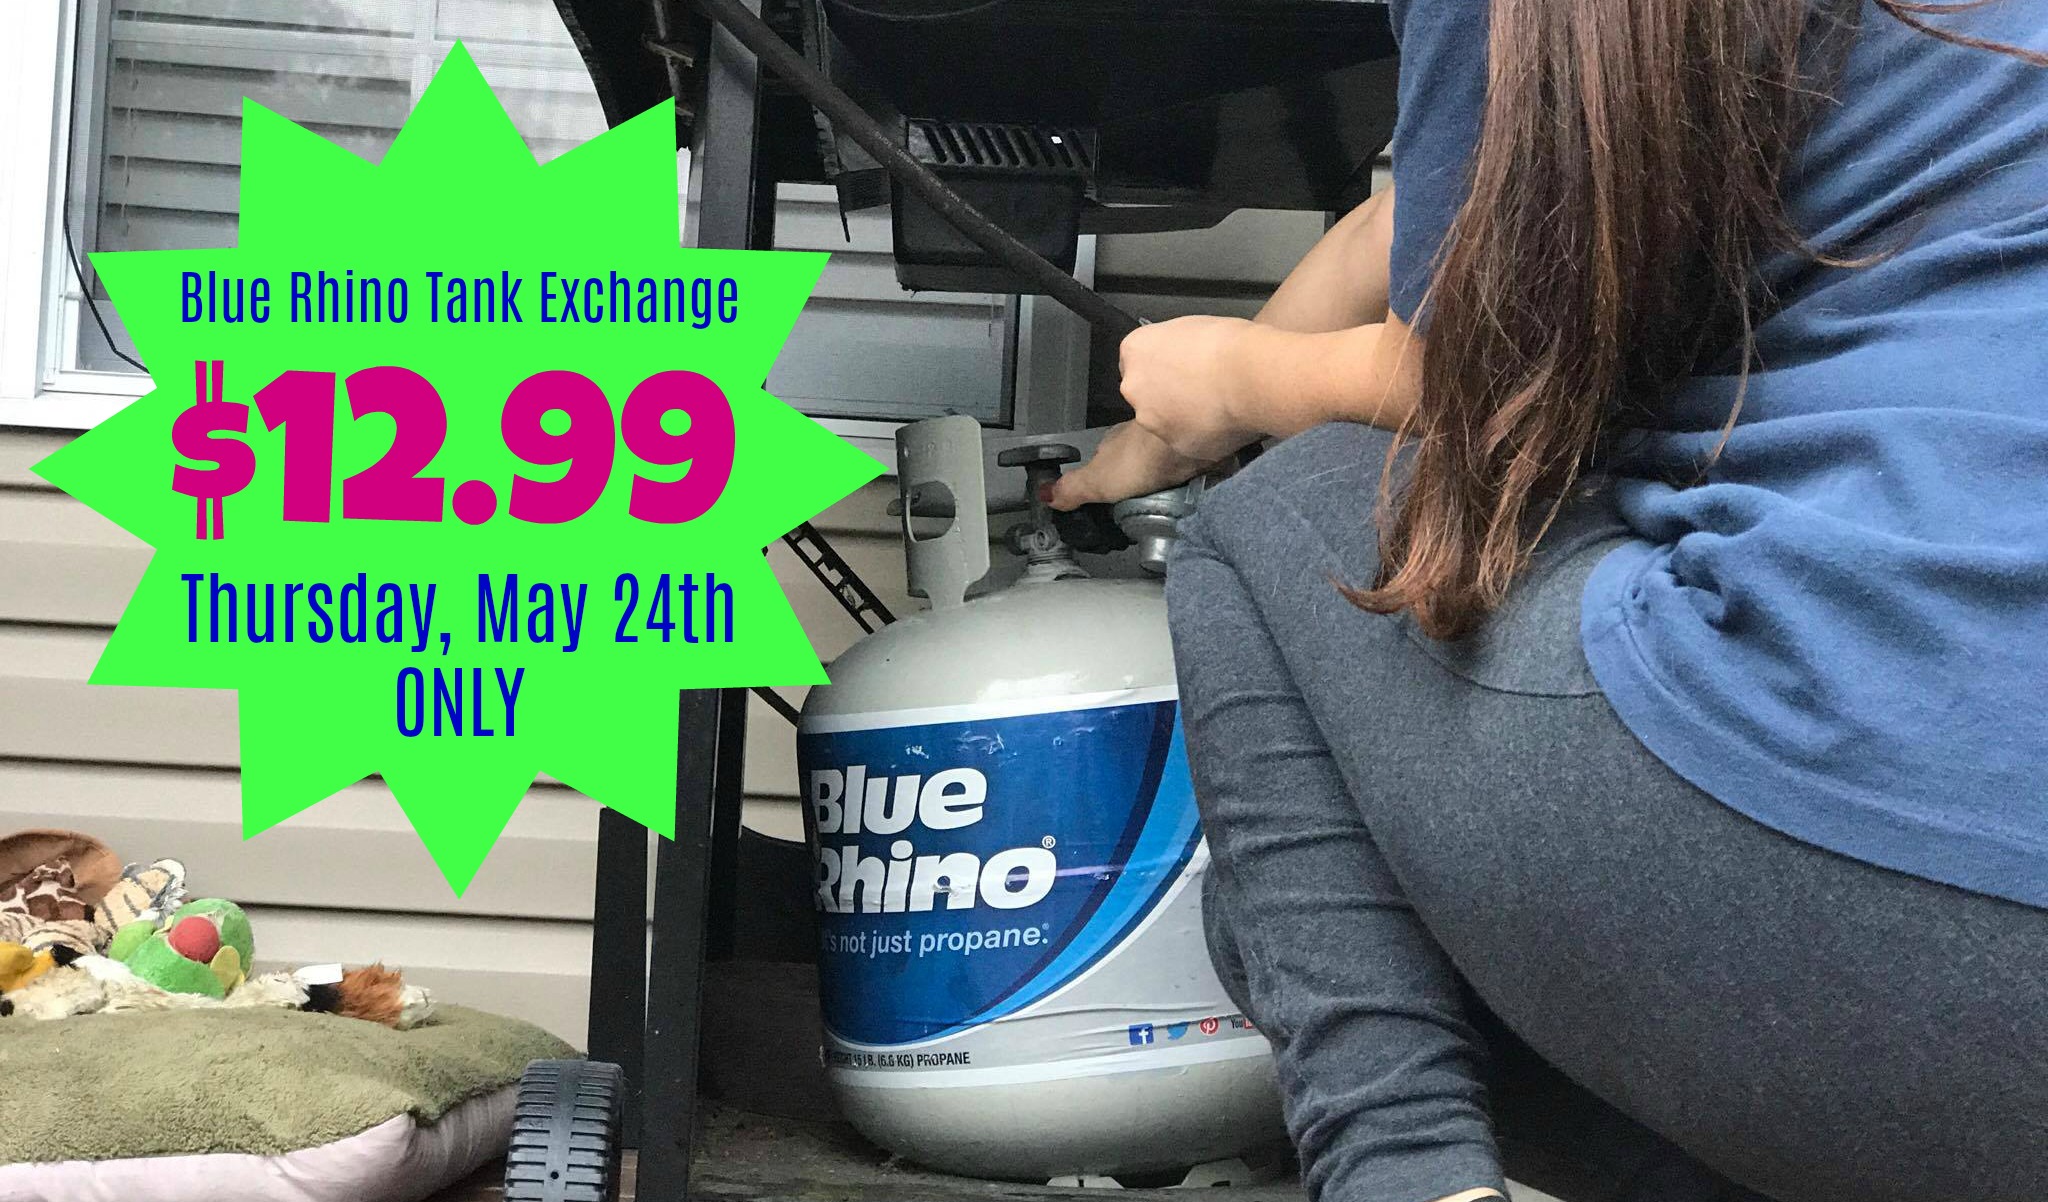 blue-rhino-tank-exchange-only-12-99-at-kroger-thursday-may-24th-only